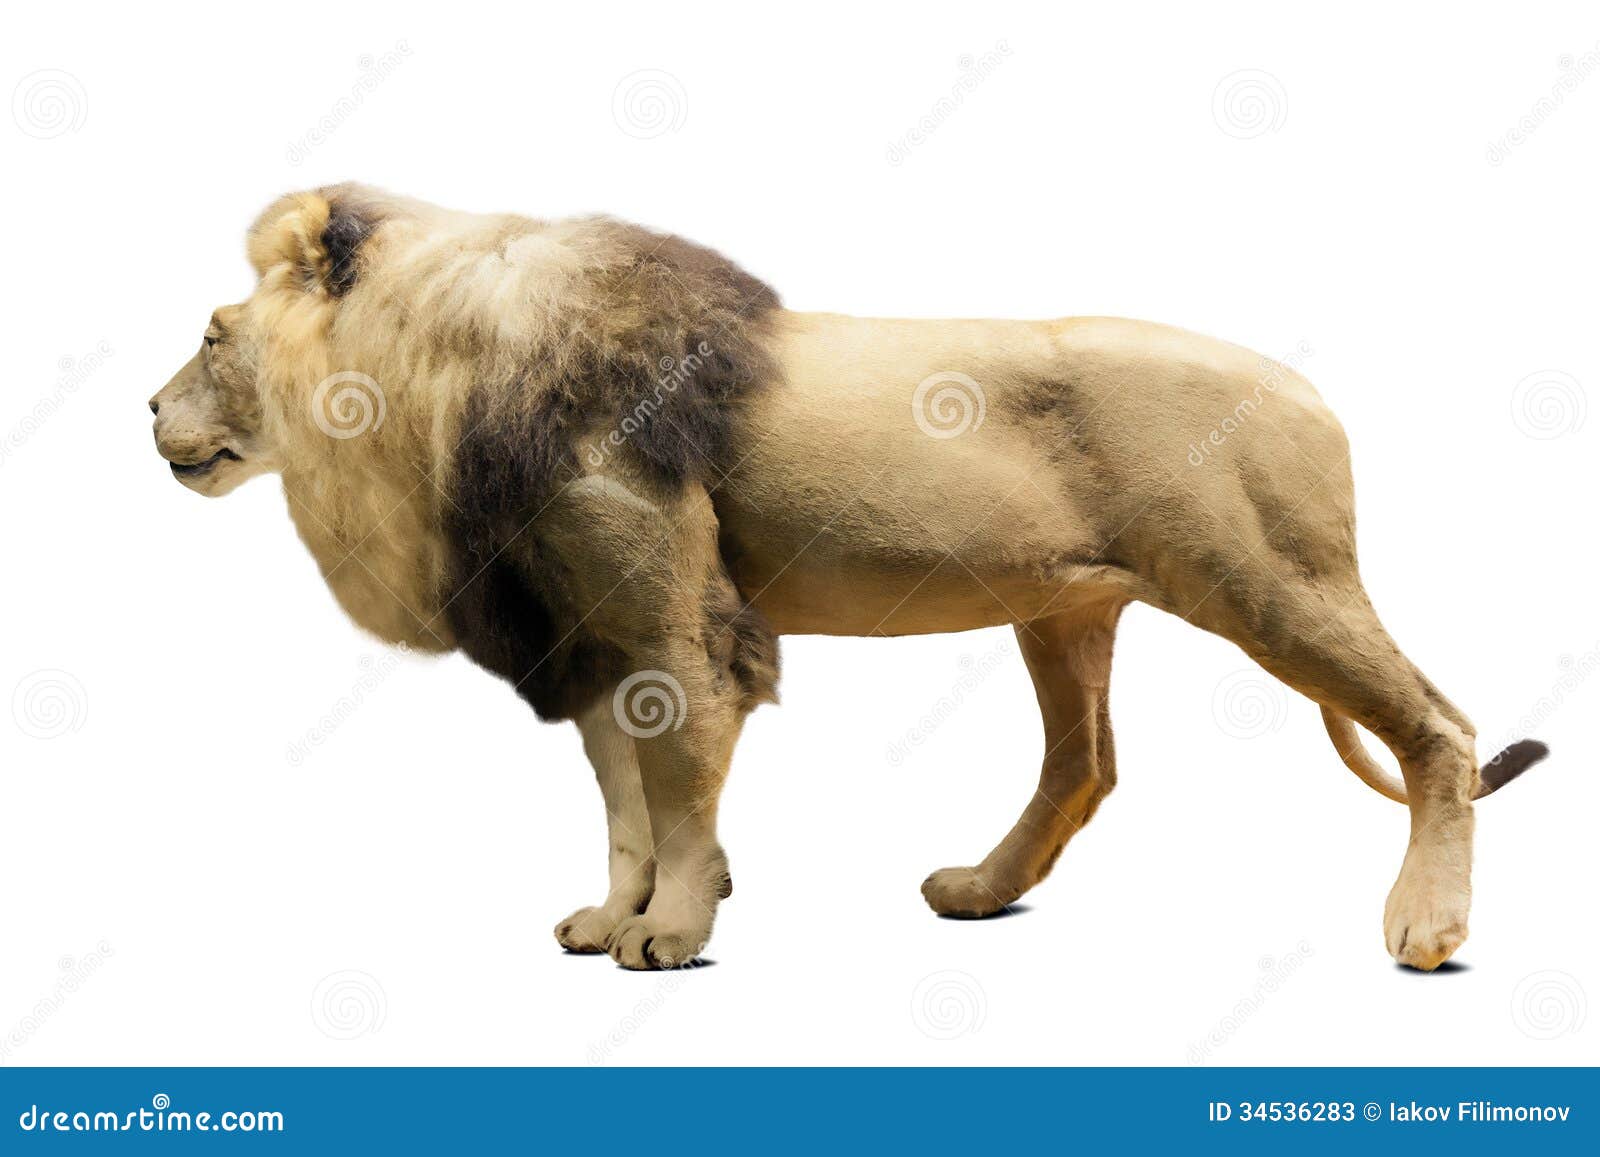 http://thumbs.dreamstime.com/z/standing-lion-over-white-background-panthera-leo-isolated-shade-34536283.jpg